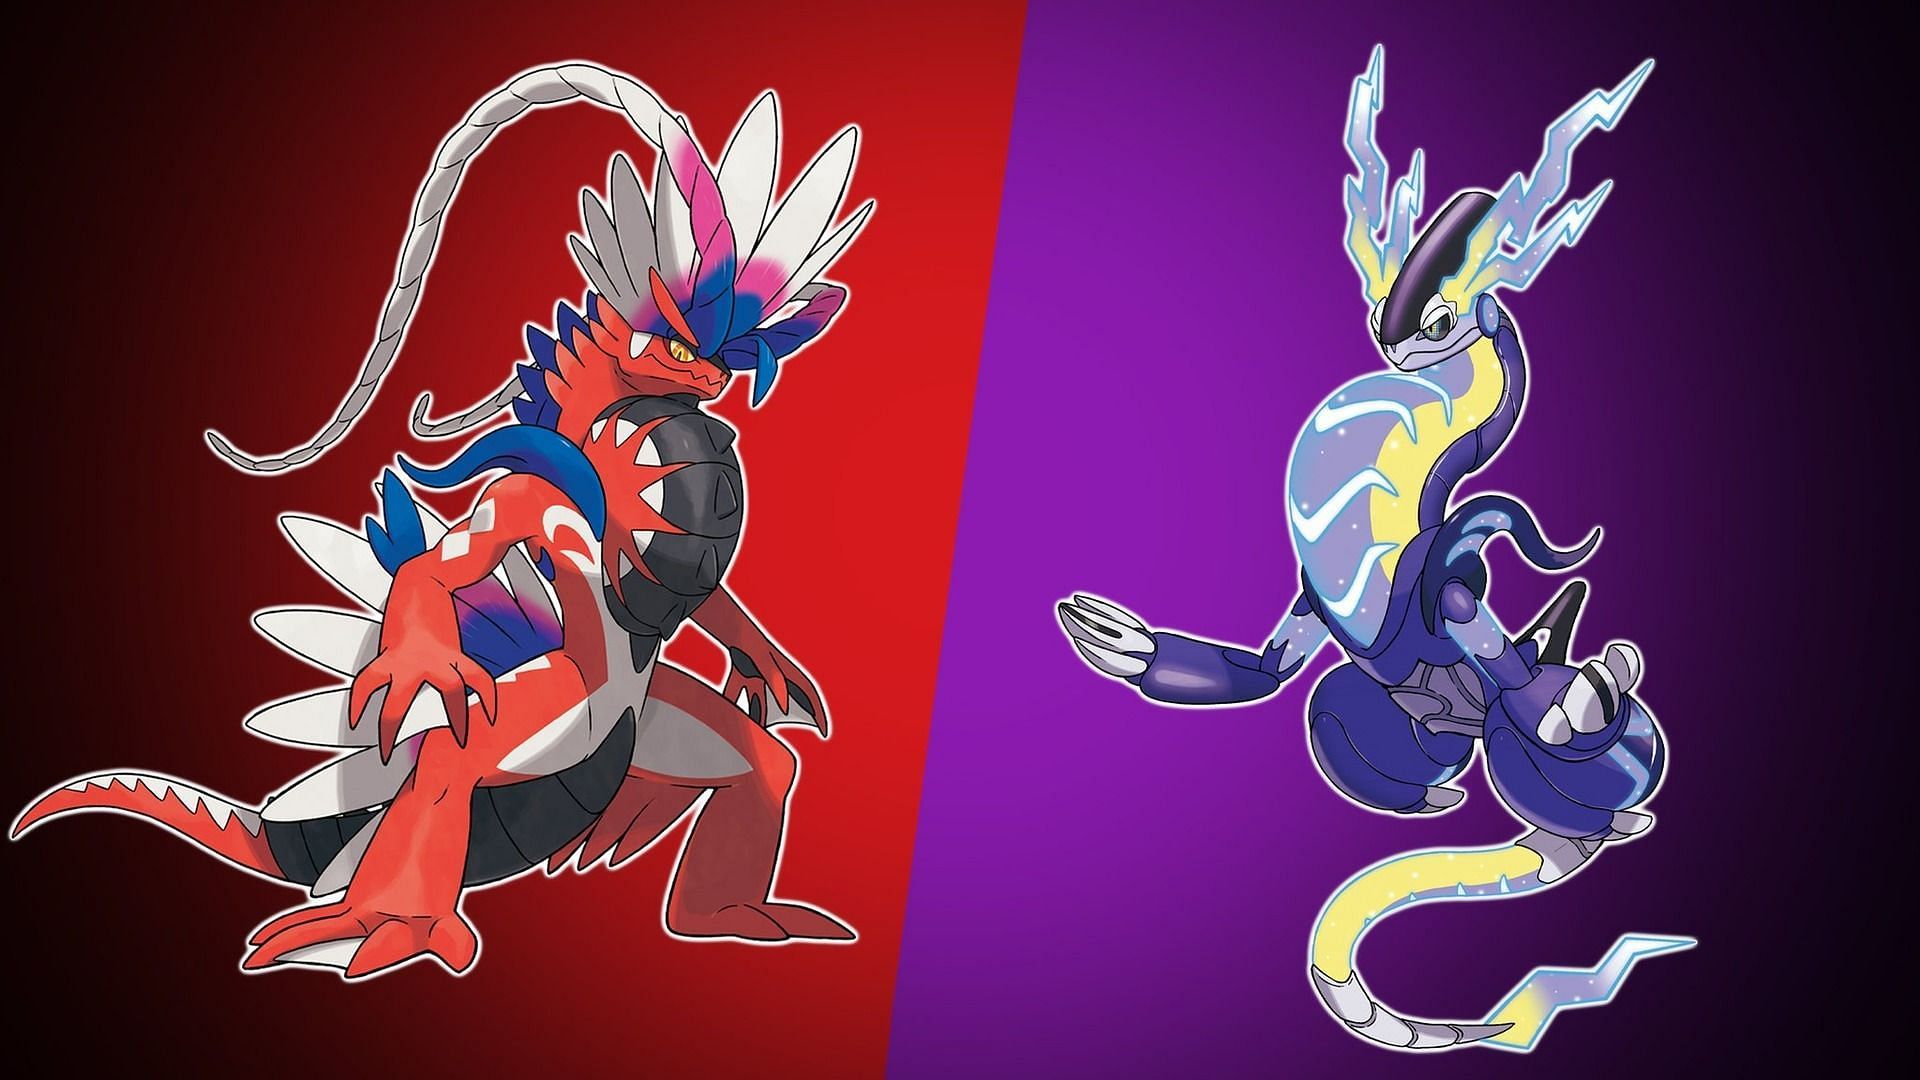 Who's your favourite Paradox Pokémon in Scarlet and Violet? ❄️I